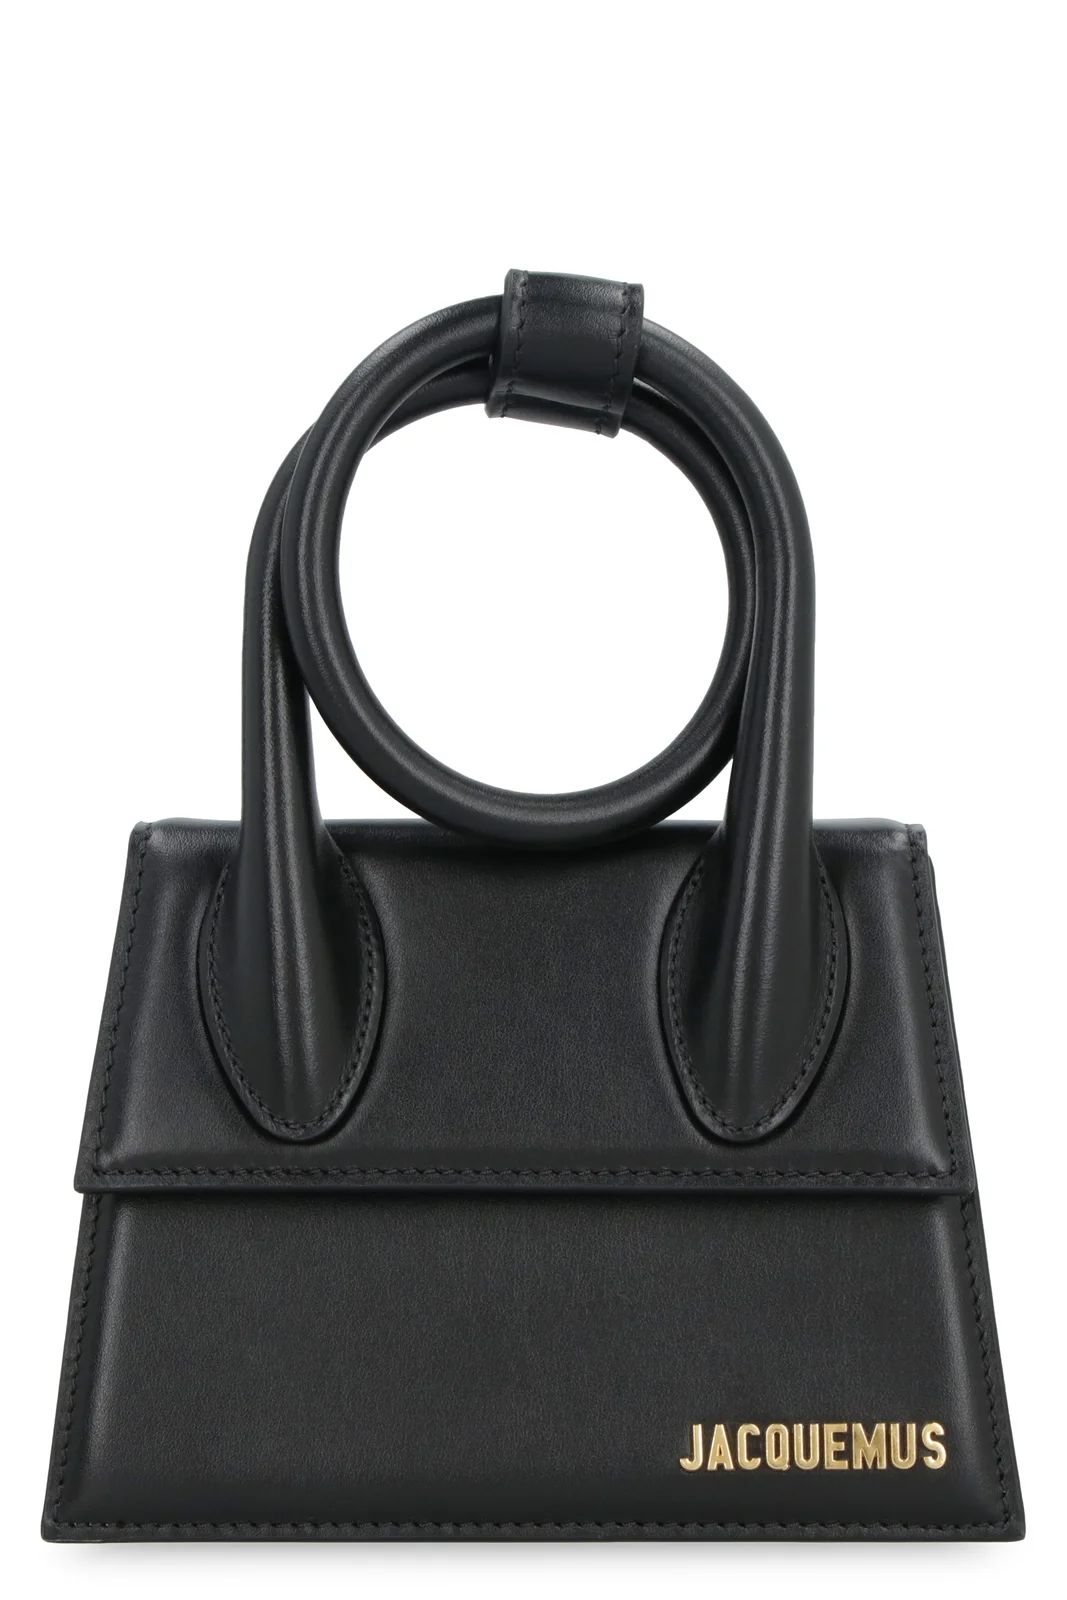 Jacquemus Le Chiquito Noeud Tote Bag | Cettire Global